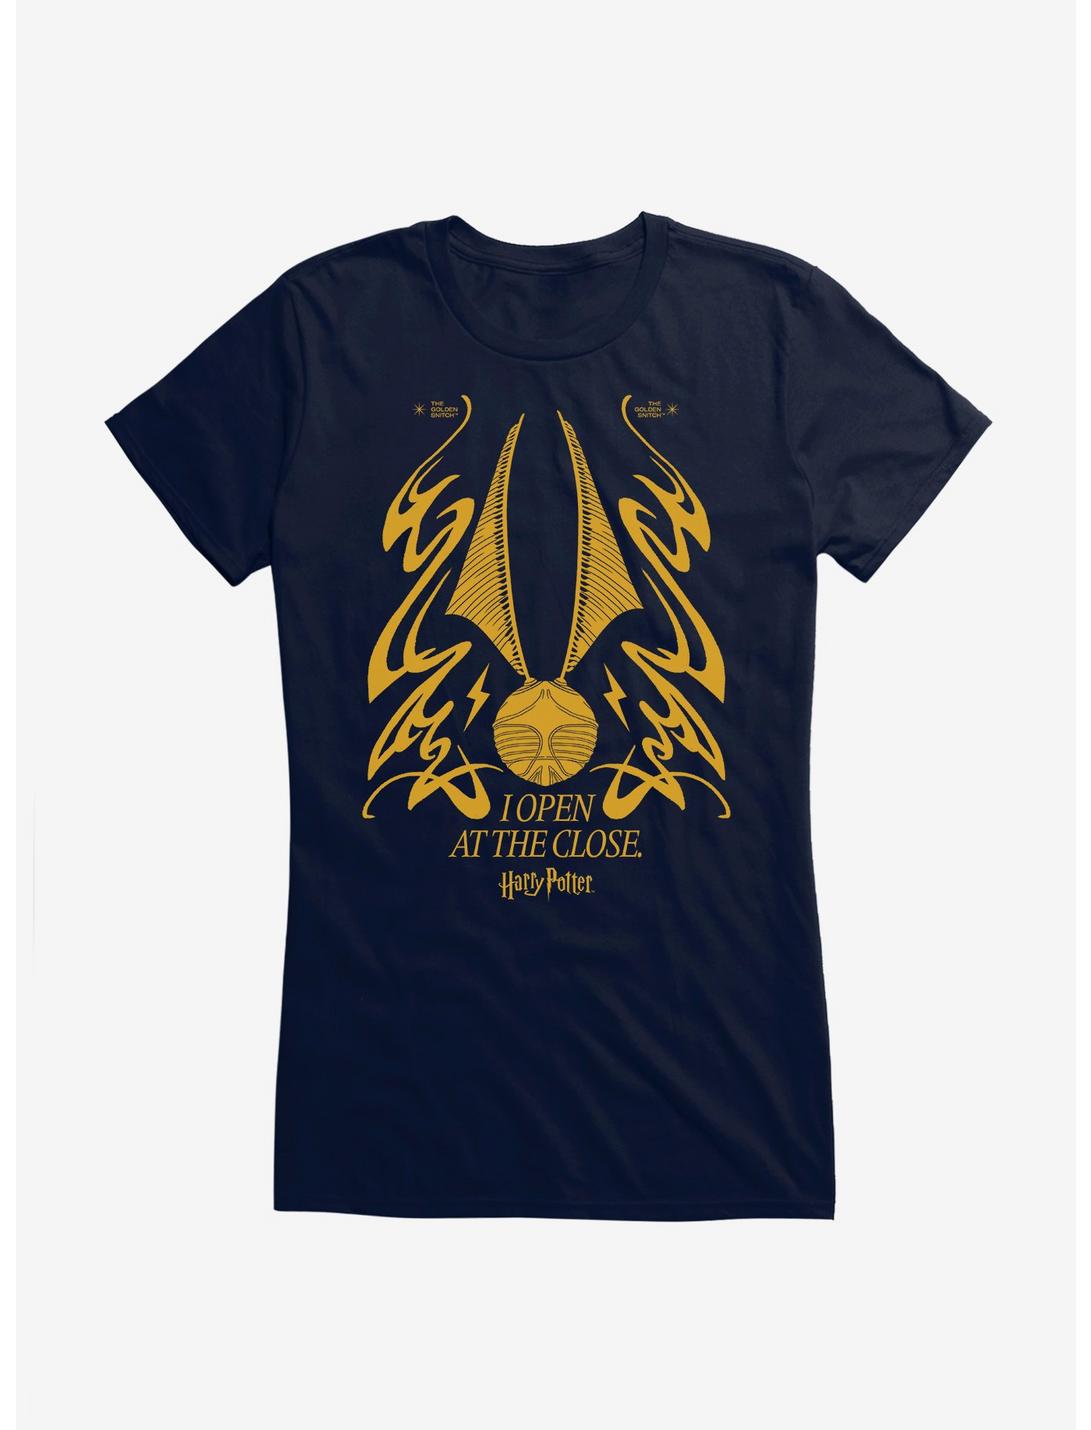 Harry Potter Snitch Open At The Close Girls T-Shirt, NAVY, hi-res